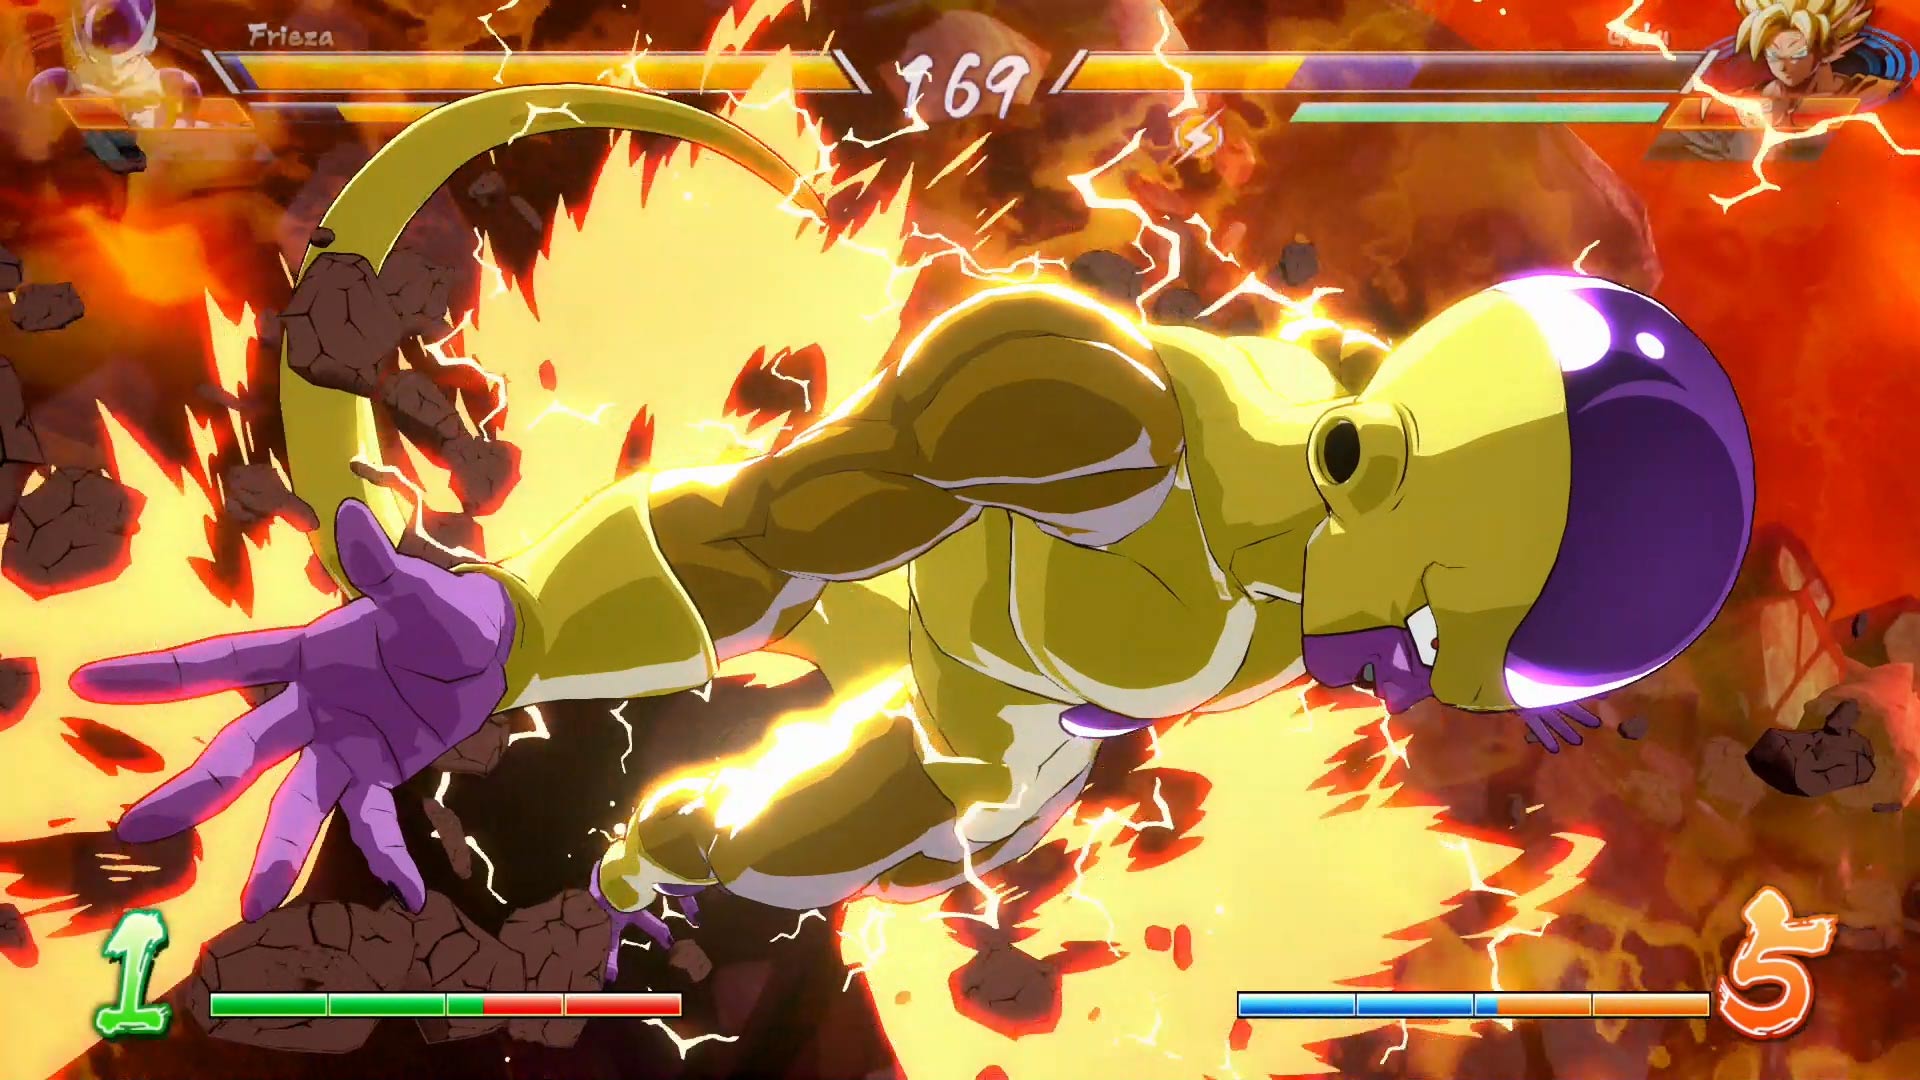 DRAGON BALL XENOVERSE 2 AND DRAGON BALL FIGHTERZ EACH SELL OVER 10 MILLION  COPIES WORLDWIDE